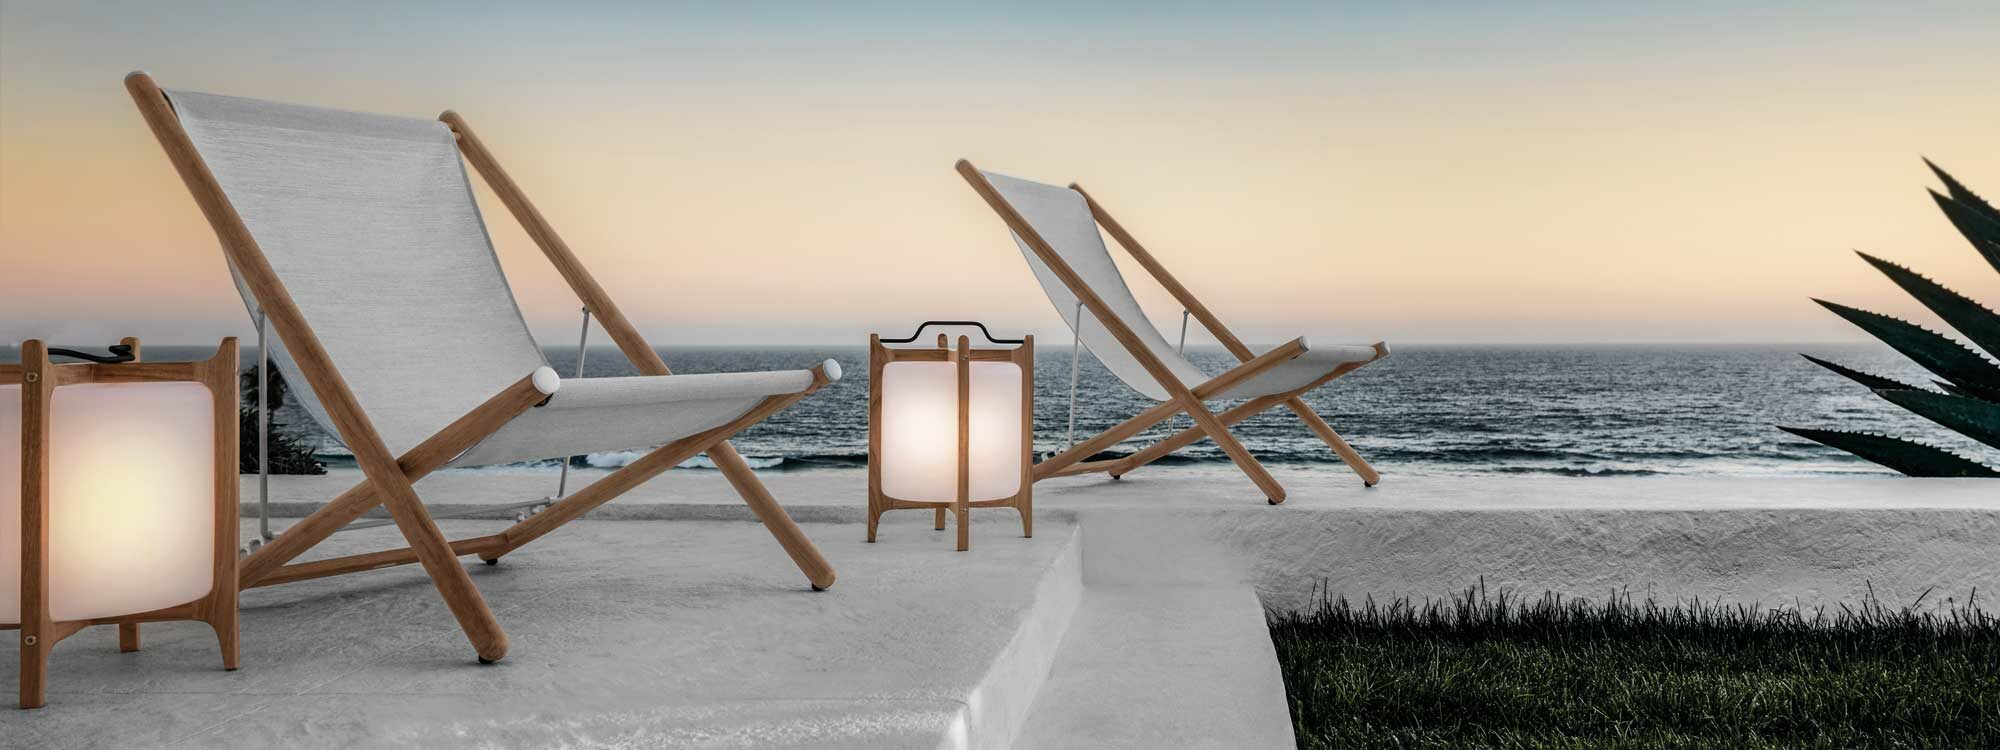 Image of lit Ambient Lanterns next to Gloster chairs on beach at dusk